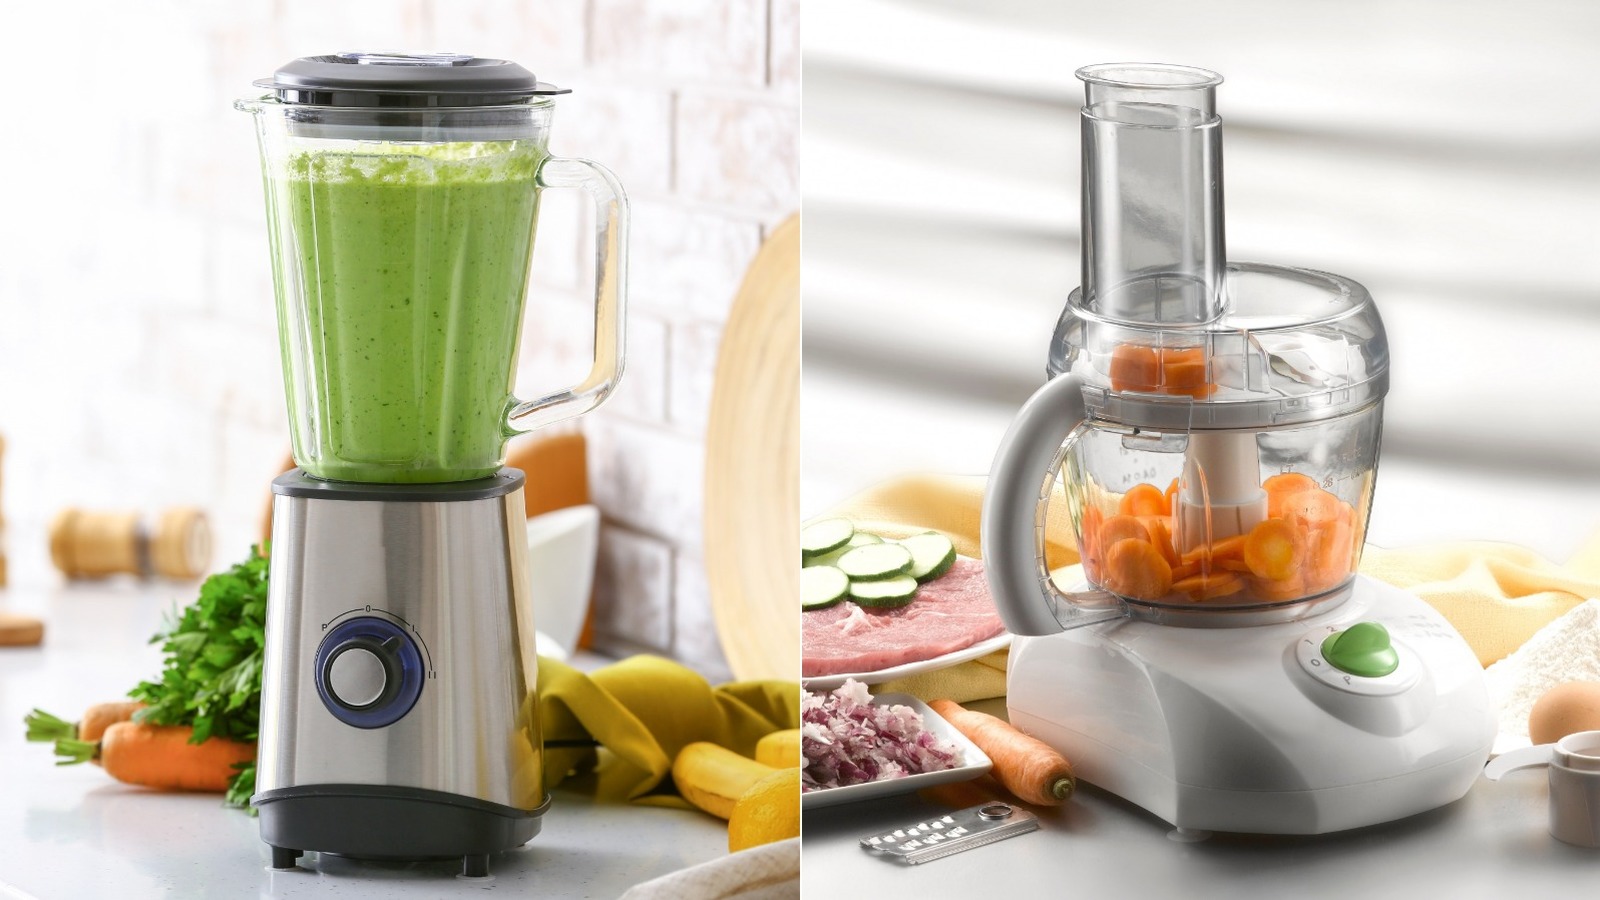 What's the difference between a blender and a food processor?